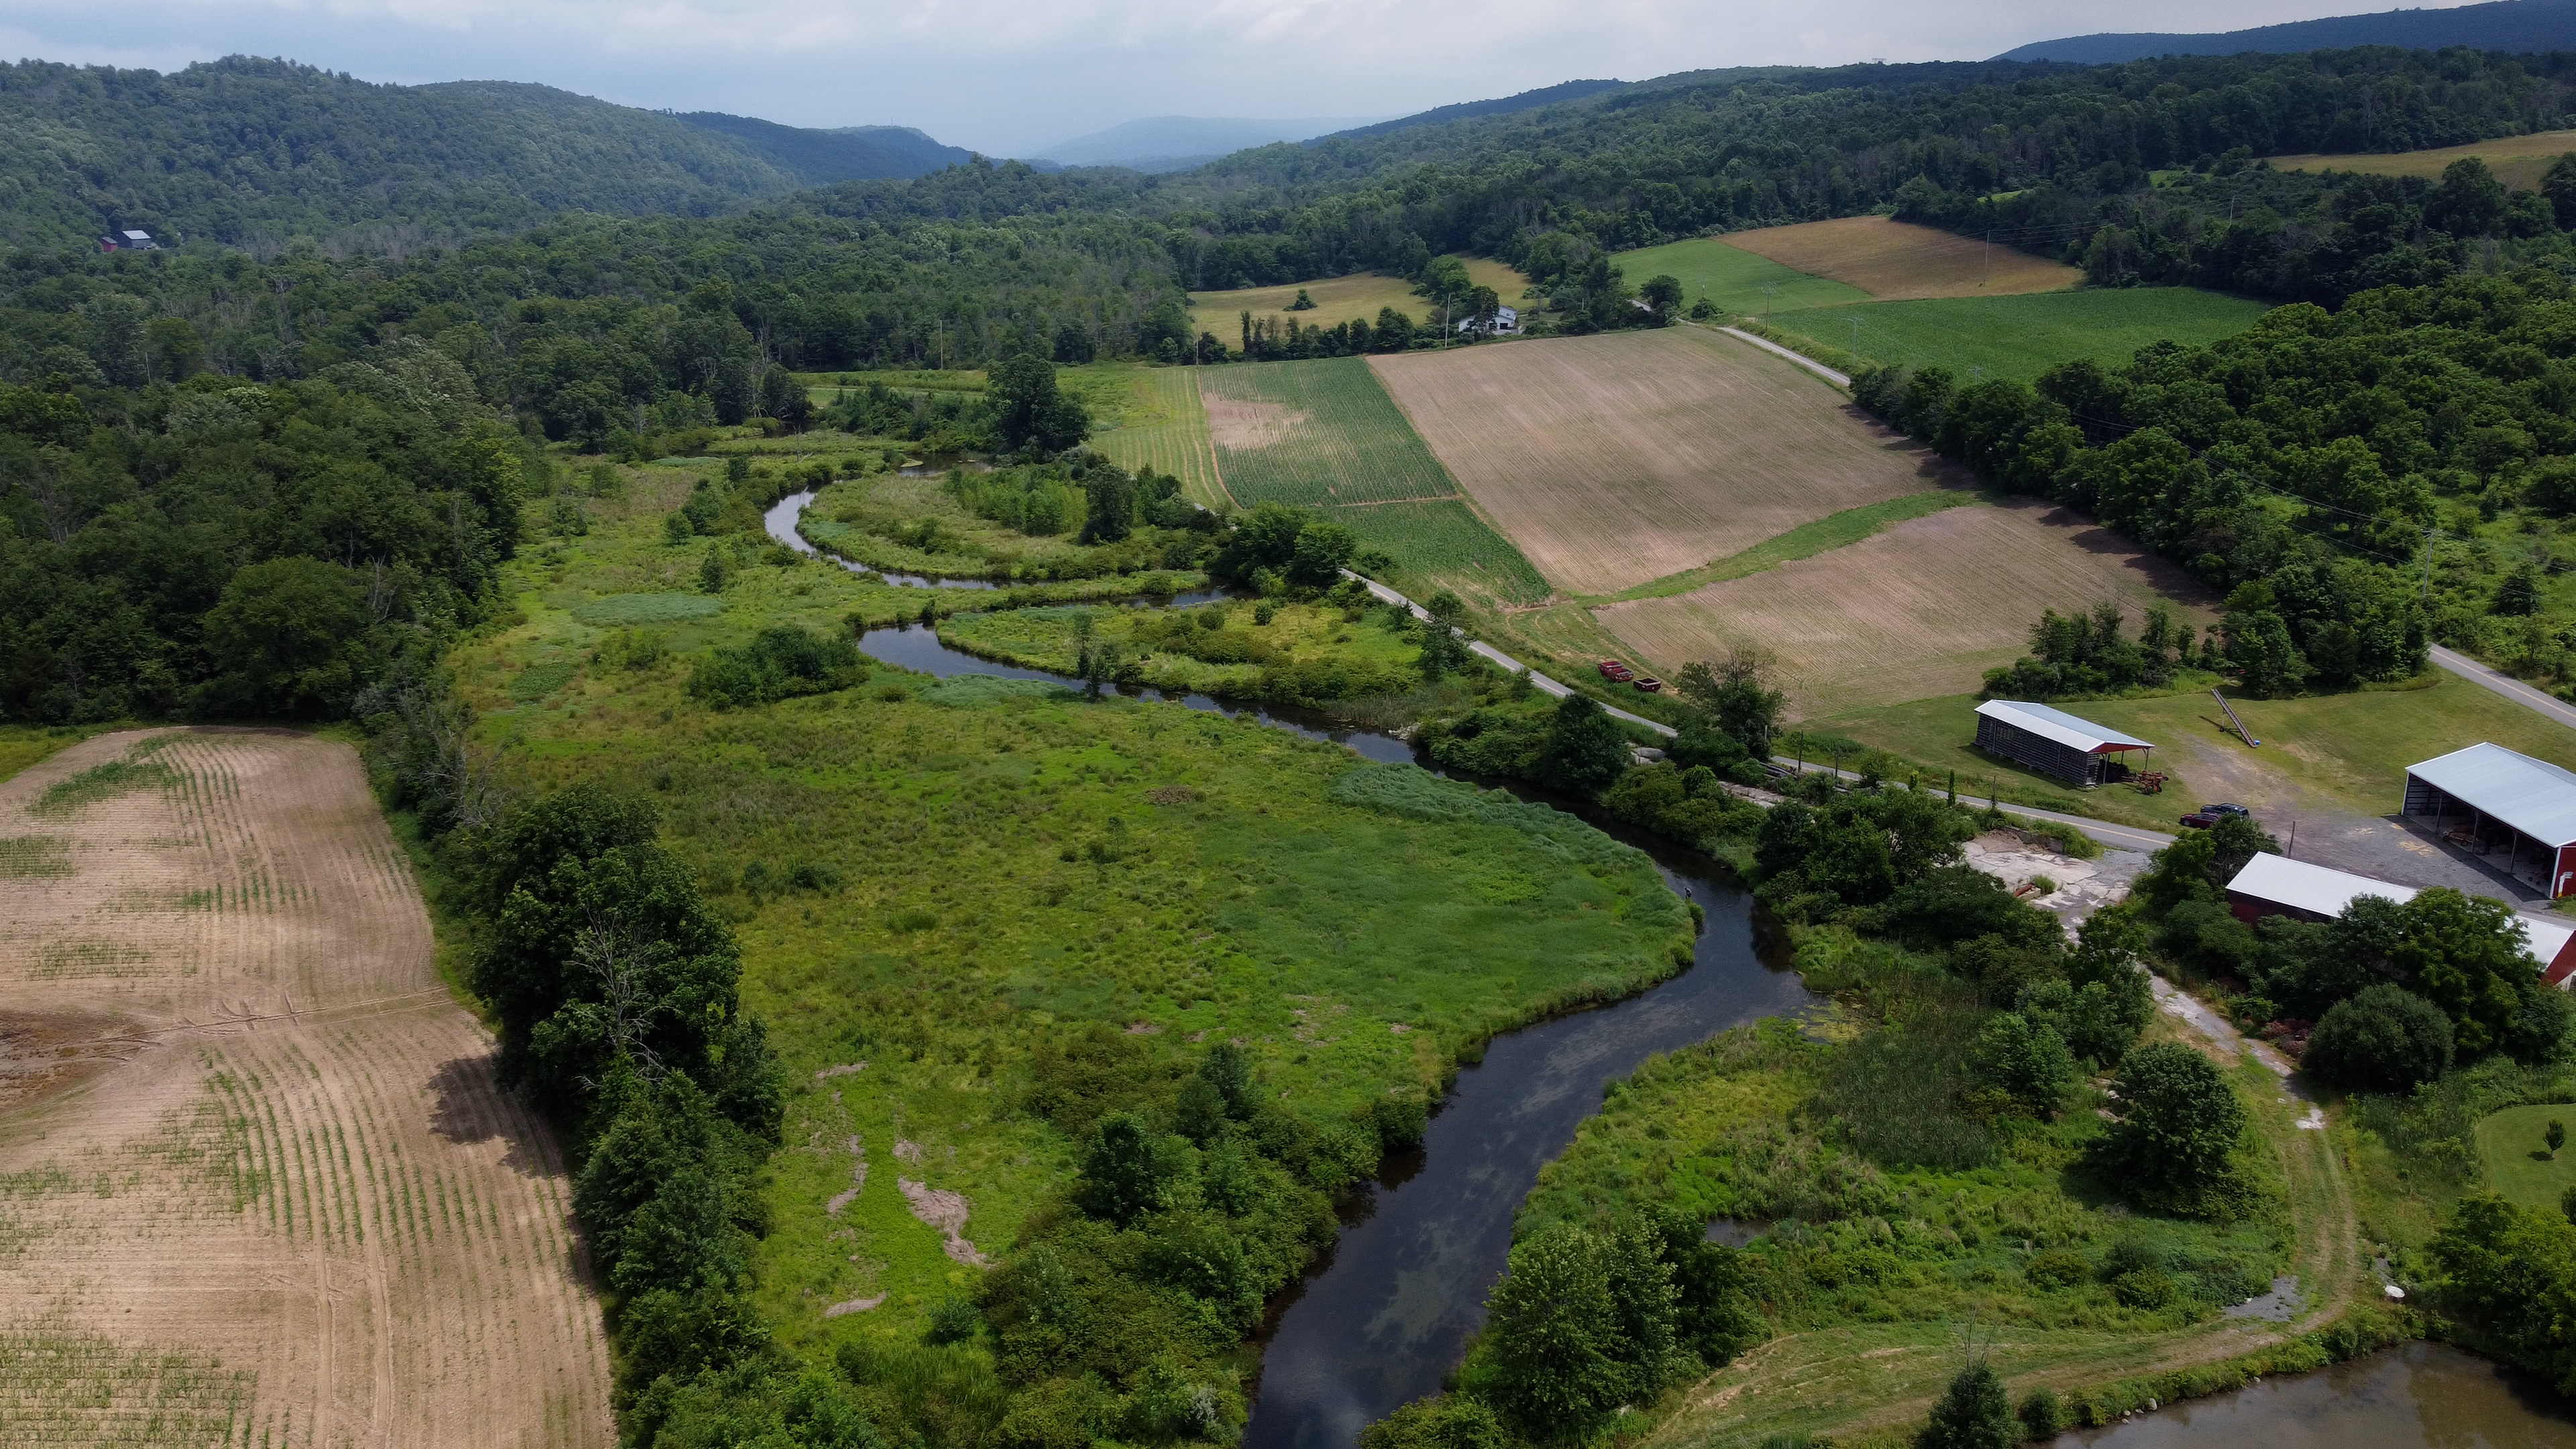 An aerial photo of a body of a stream winding through a farm field and into a forest.